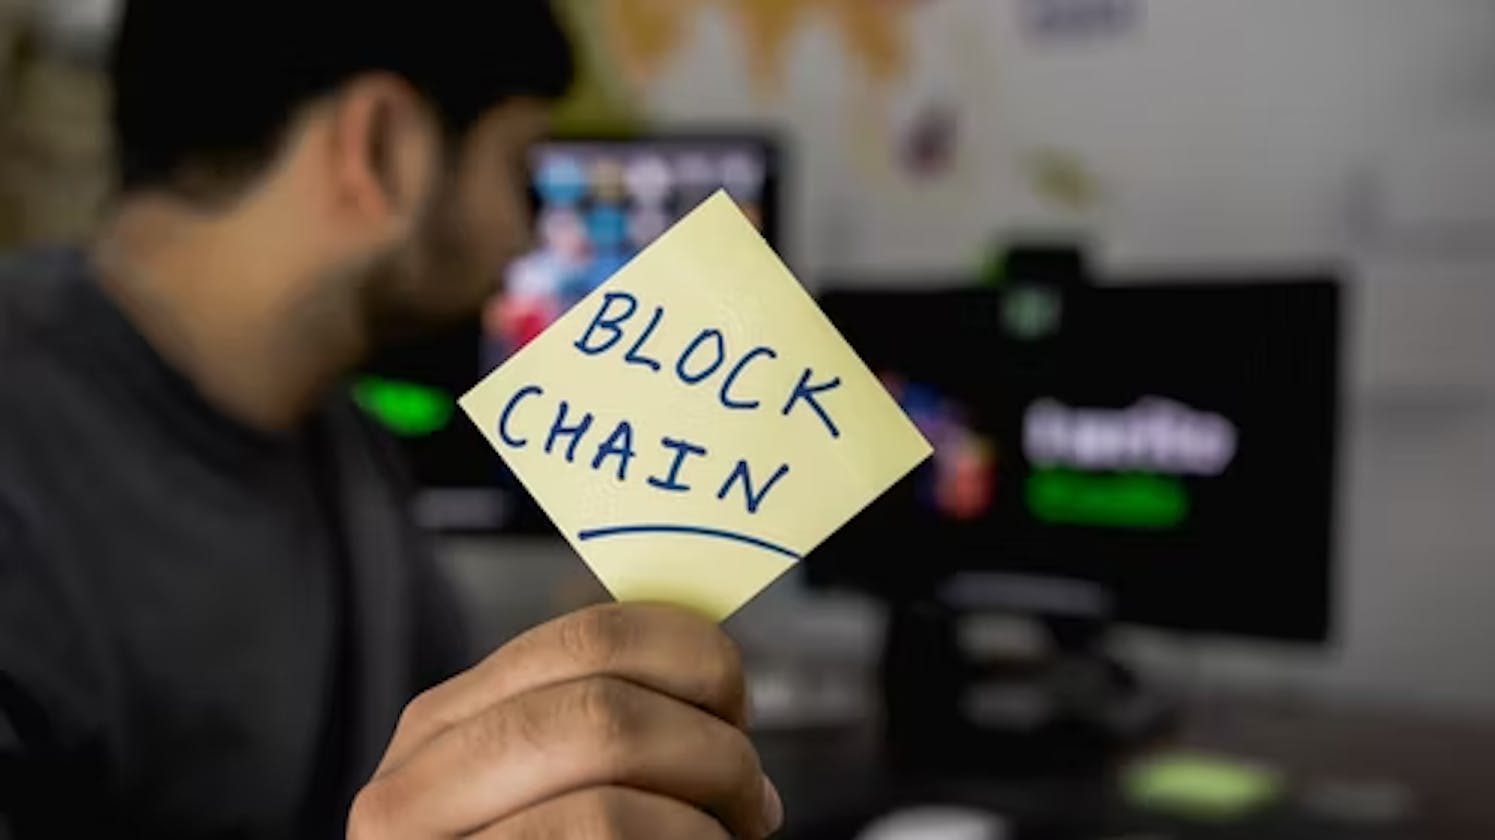 How is Blockchain revolutionizing our future?